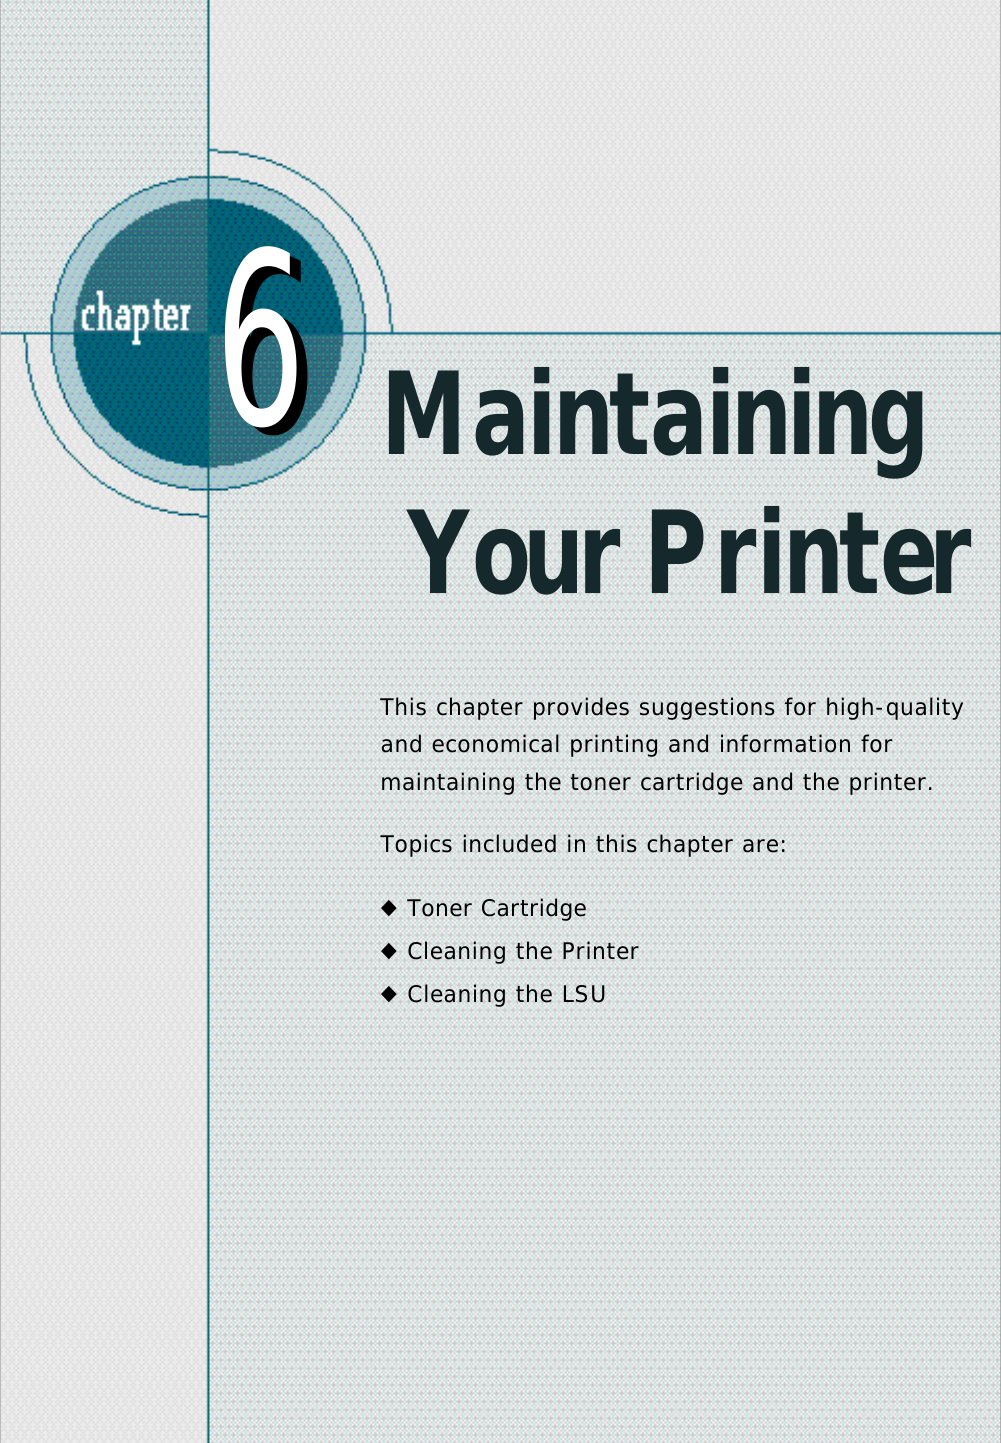 Maintaining Your PrinterThis chapter provides suggestions for high-qualityand economical printing and information formaintaining the toner cartridge and the printer. Topics included in this chapter are:◆Toner Cartridge◆Cleaning the Printer◆Cleaning the LSU66